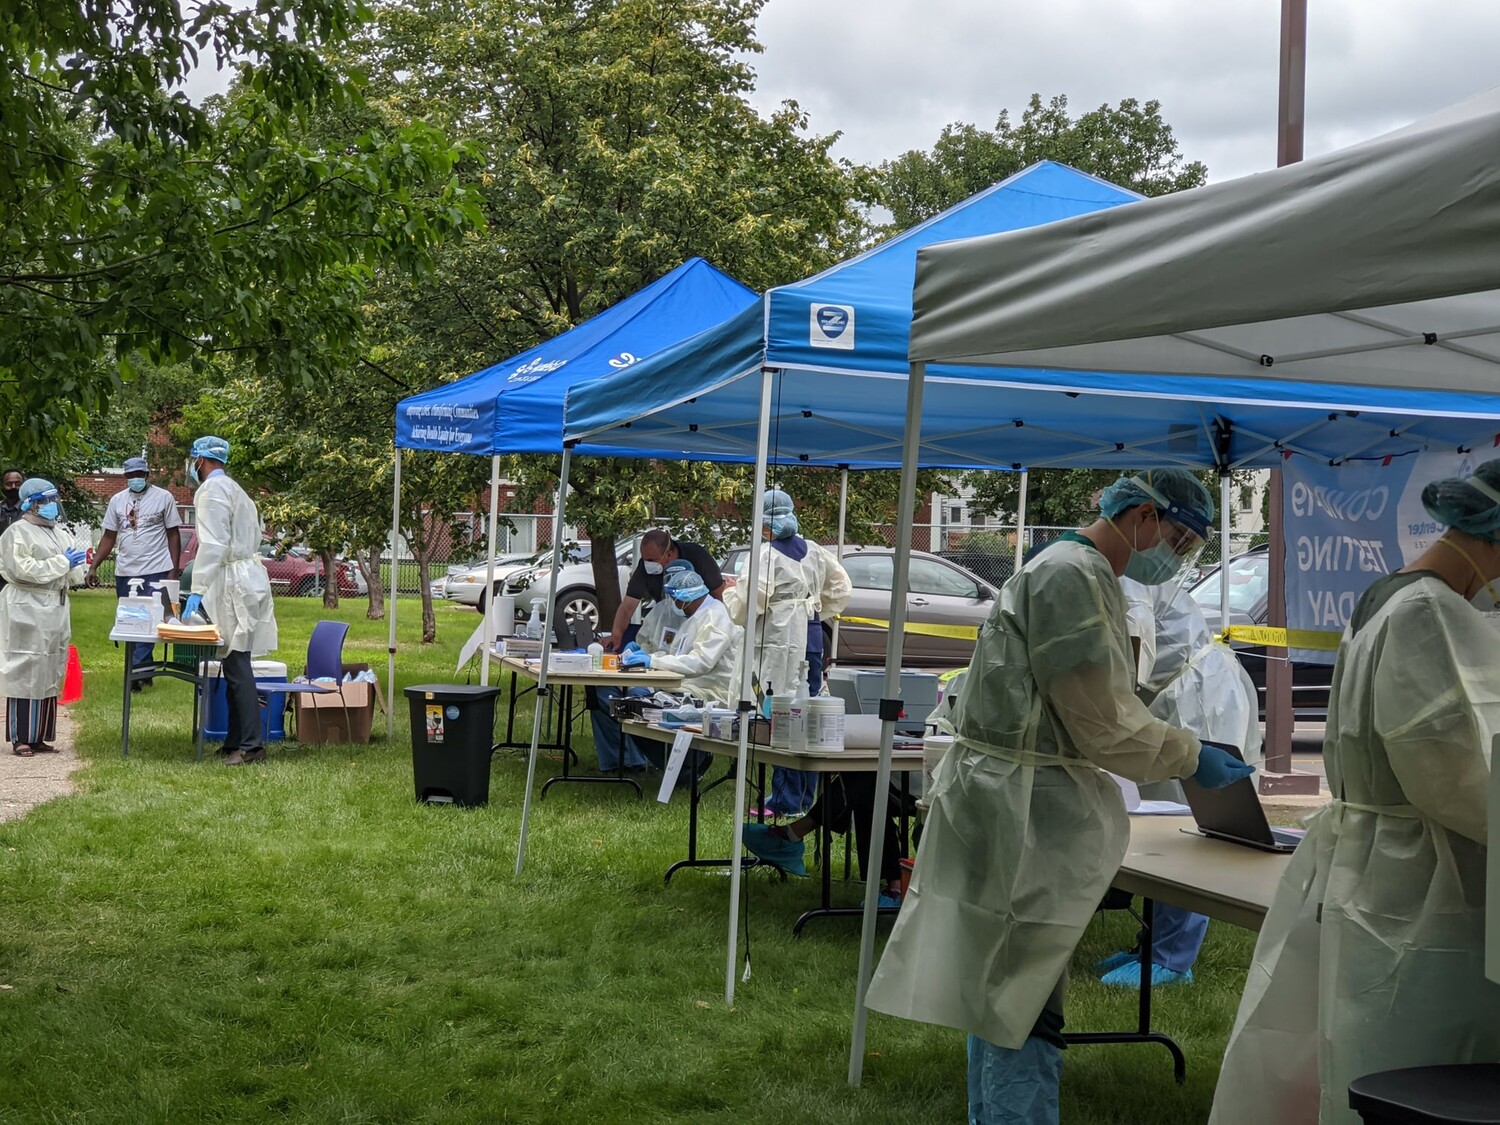 Volunteers in medical gowns and masks work at an outdoor health clinic